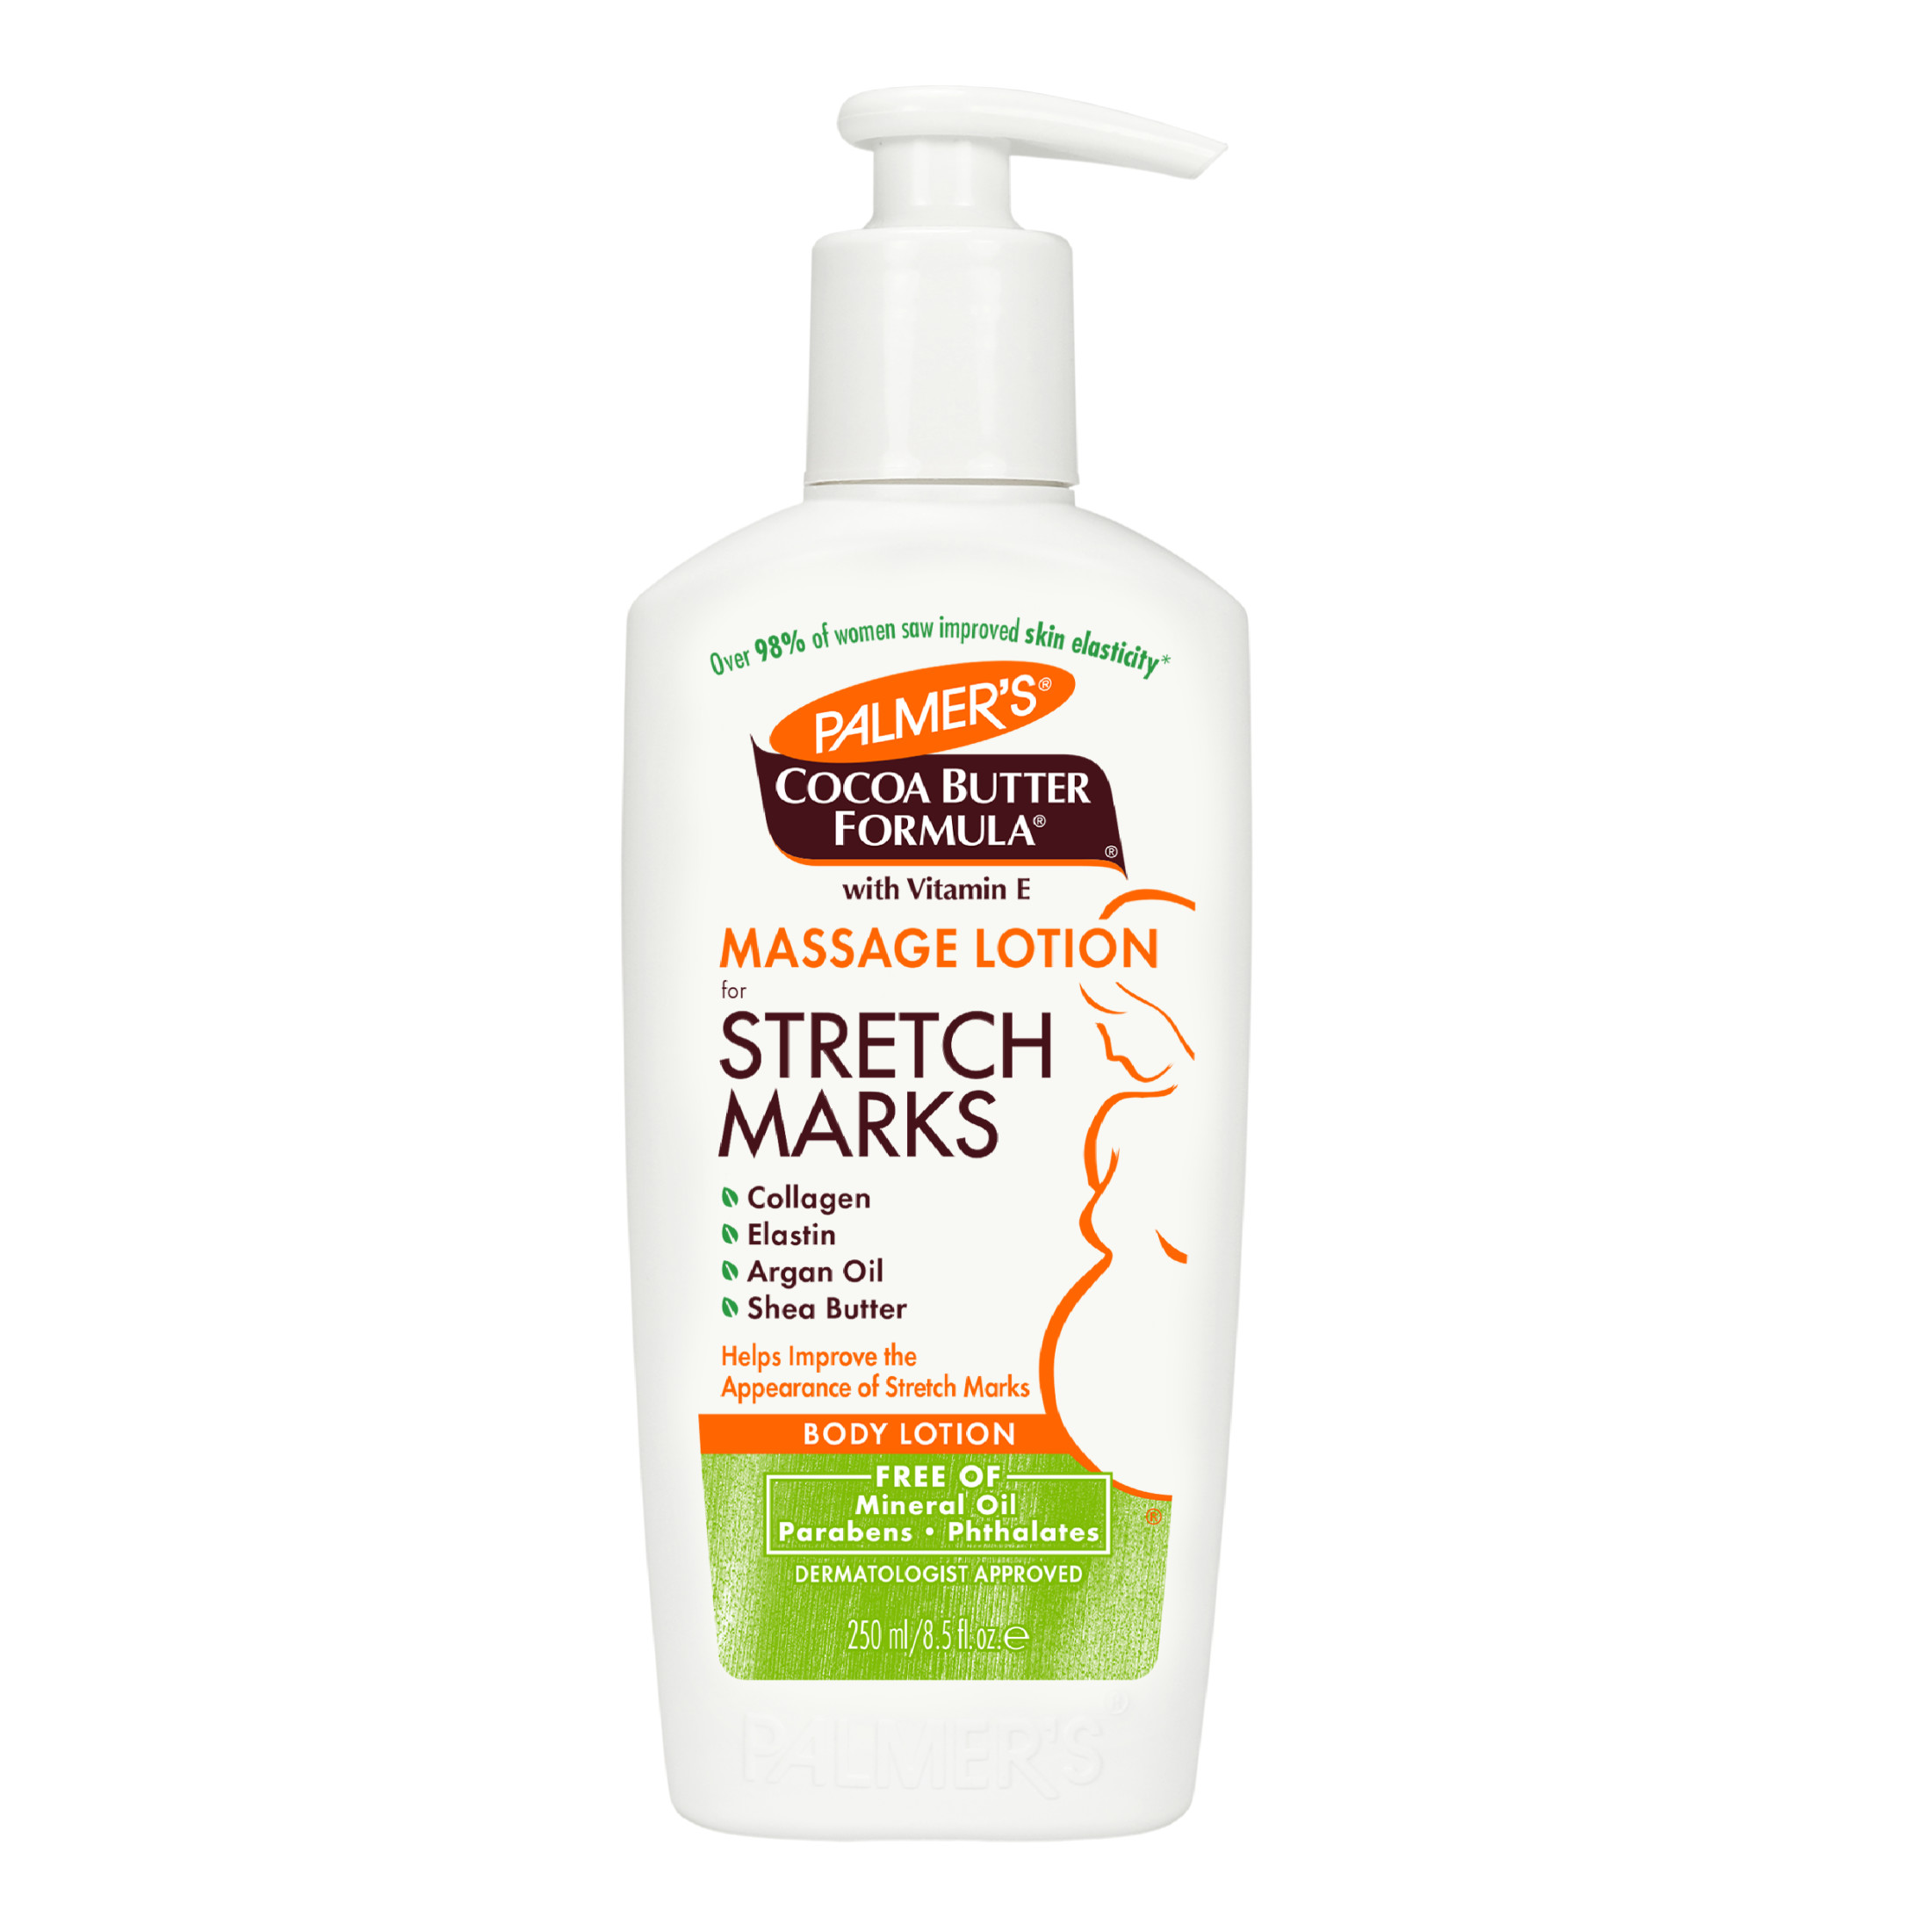 Palmer's Cocoa Butter Formula Massage Lotion for Stretch Marks, 8.5 fl. oz. - image 1 of 16